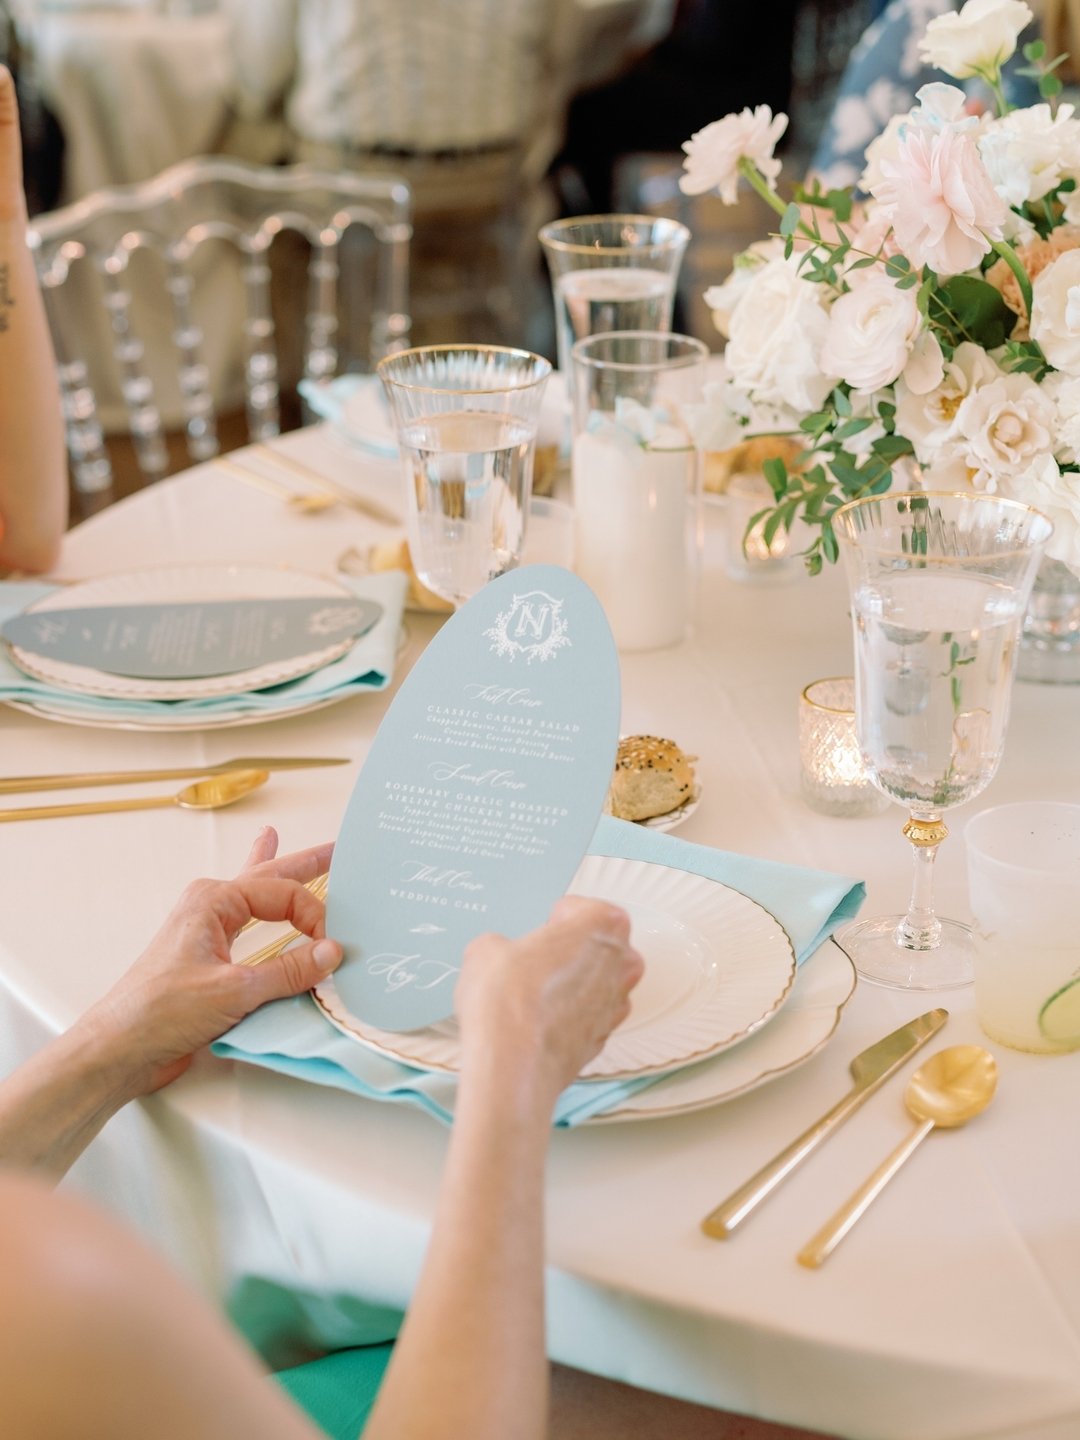 Highlight your exquisite meal selection with a stunning custom menu, crafted just for your special day!
.
.
.
Planning &amp; Design: @gatheredeventsdfw
Venue: @thefrenchfarmhousevenue
Photographer: @stephaniebrazzle
Videographer: @bsrweddingfilms
Flo